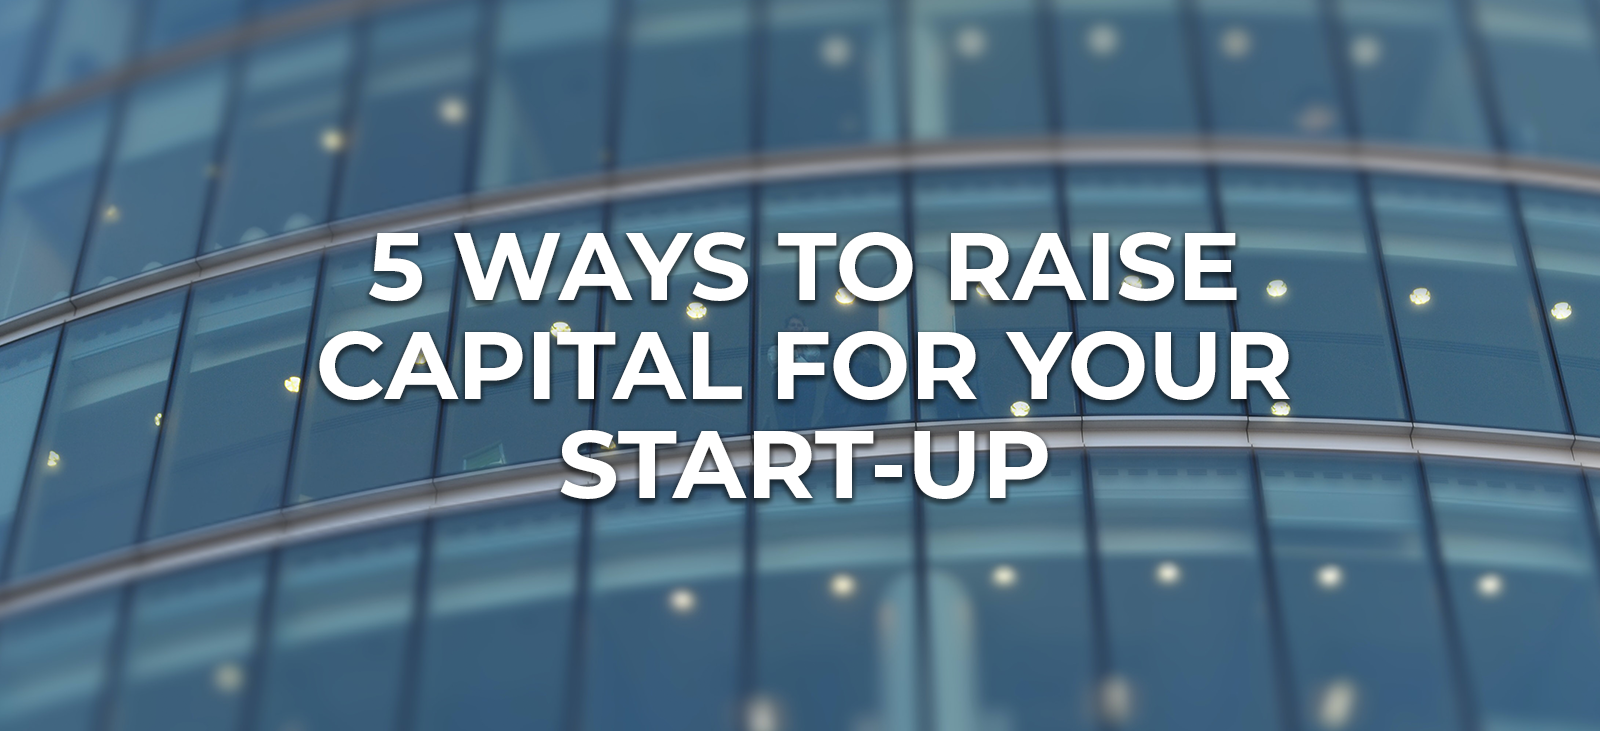 raise capital for startup business in Canada